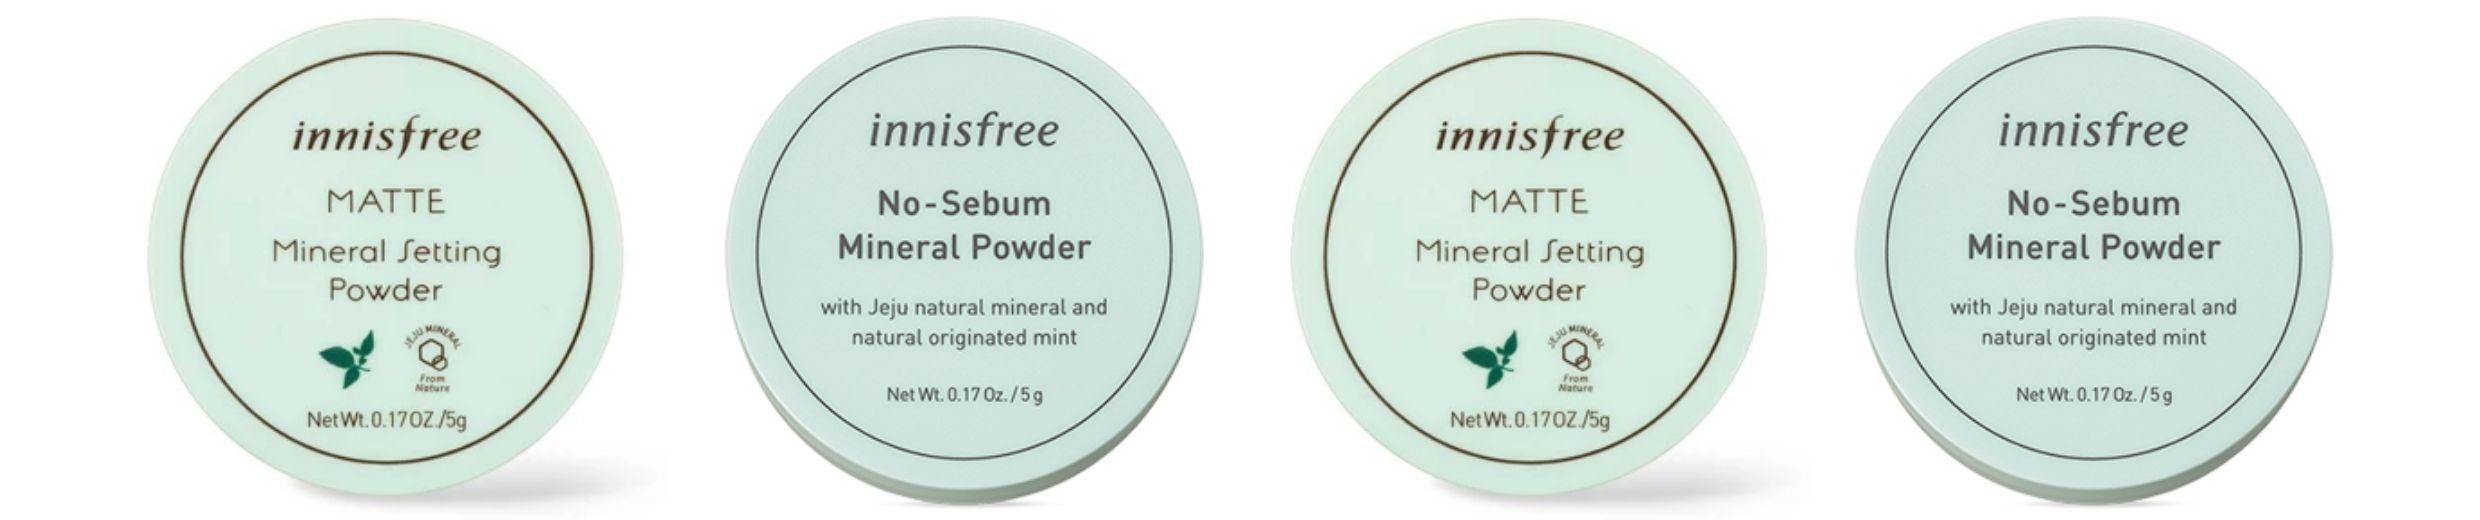 What Does Innisfree’s Rebranding Mean for Your Fave Products?